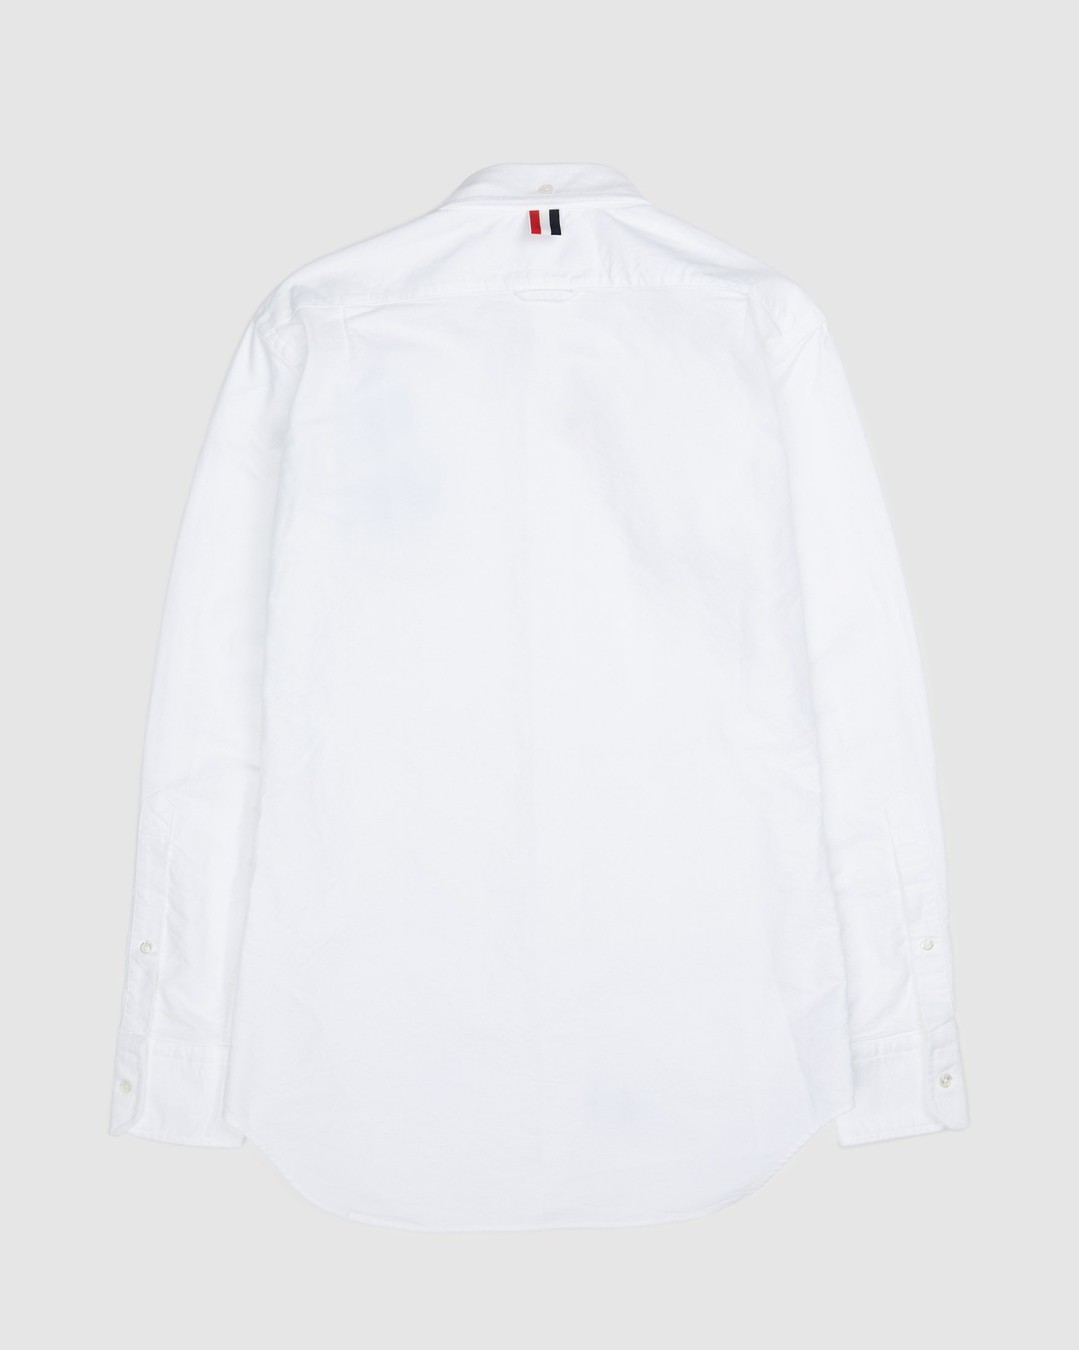 Colette Mon Amour x Thom Browne – White Peace Classic Shirt - Longsleeve Shirts - White - Image 2